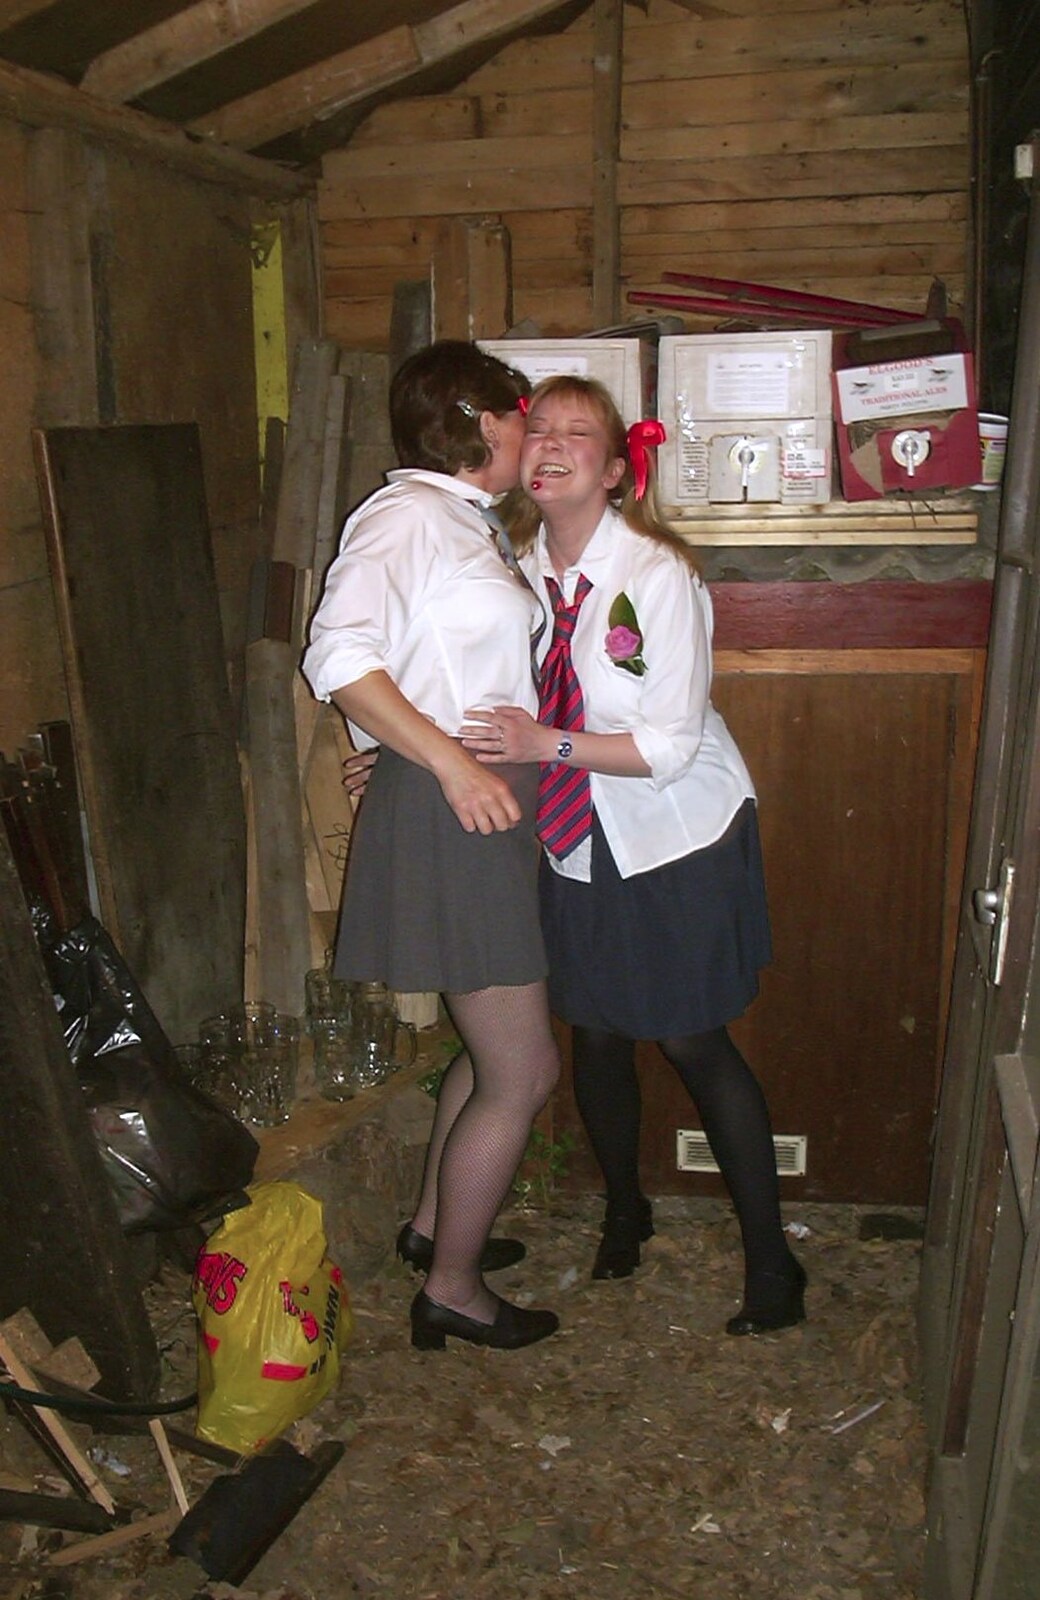 Random goings-on in the shed from Jenny's School Disco, Thrandeston, Suffolk - 17th May 2003